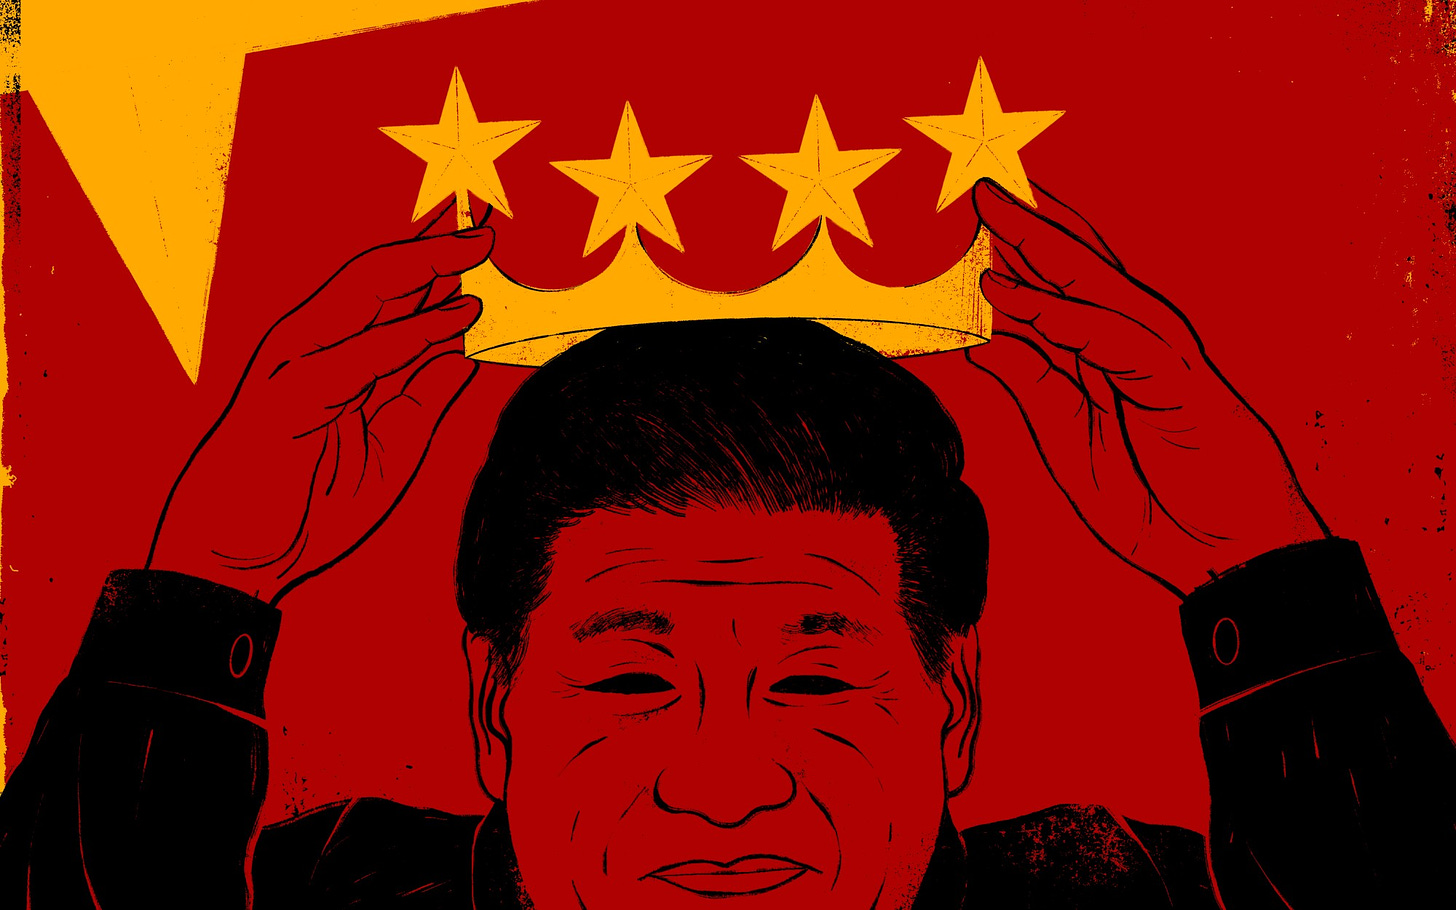 An illustration of Xi Jinping putting on a crown.